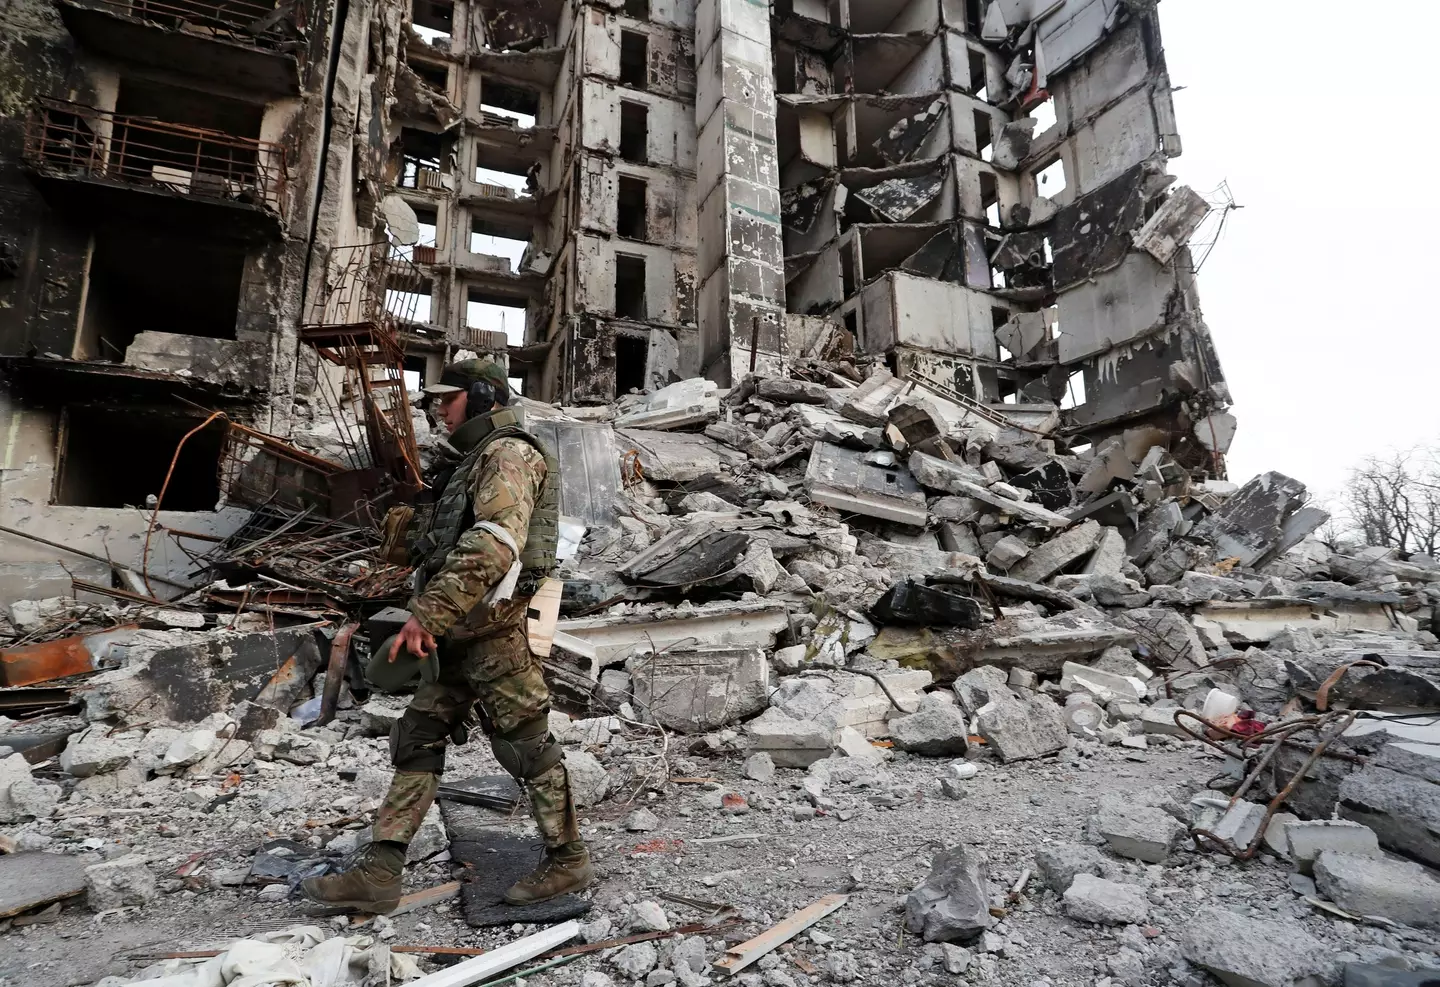 Nearly 5,000 people are estimated to have died in Mariupol.